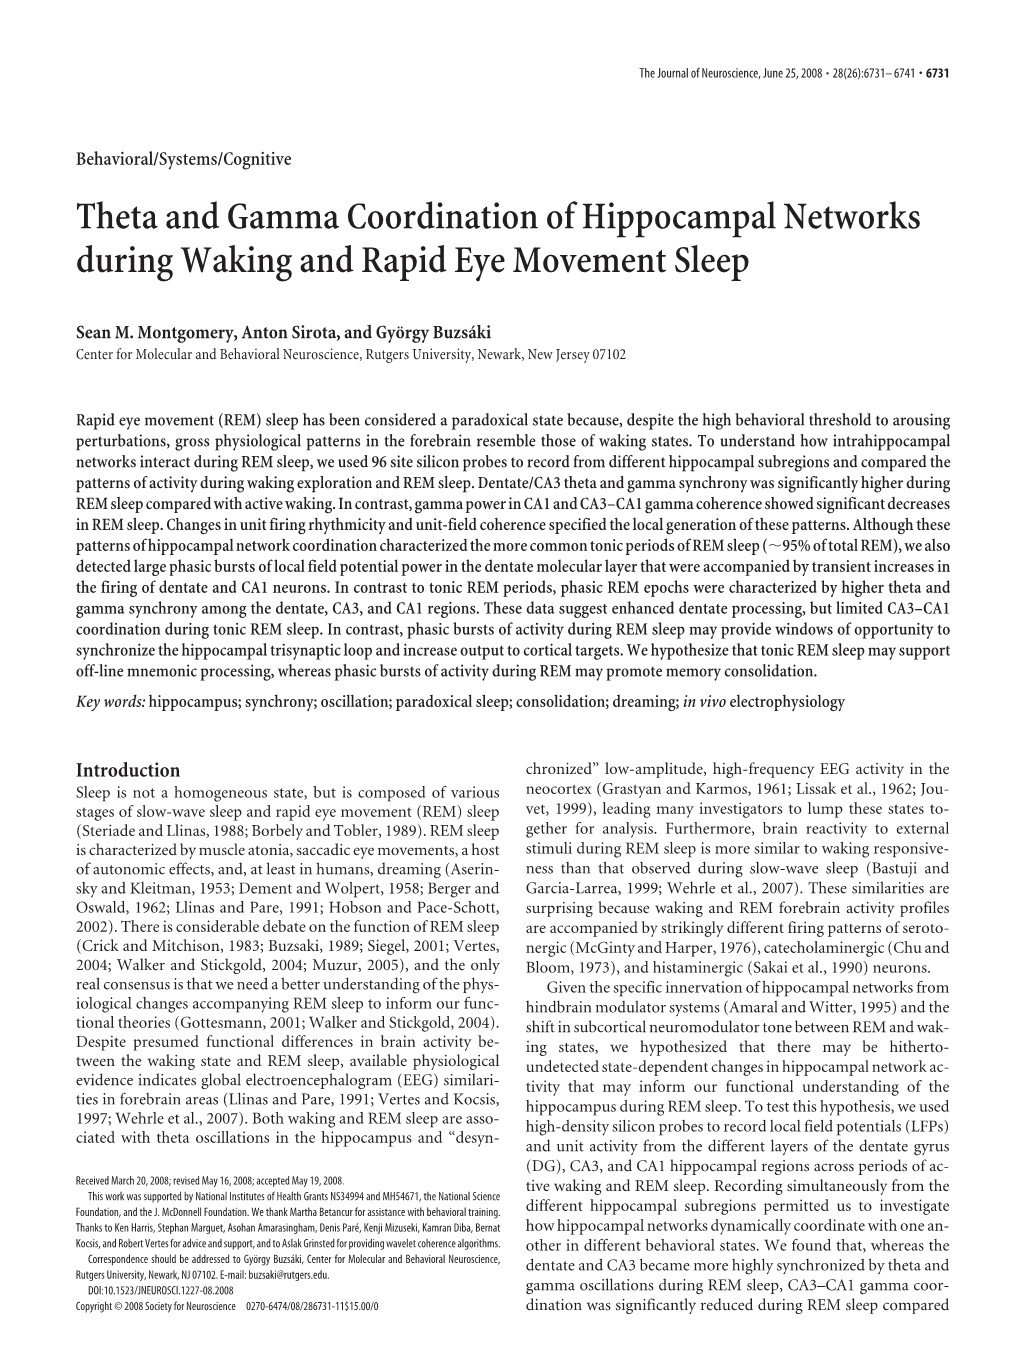 Theta and Gamma Coordination of Hippocampal Networks During Waking and Rapid Eye Movement Sleep